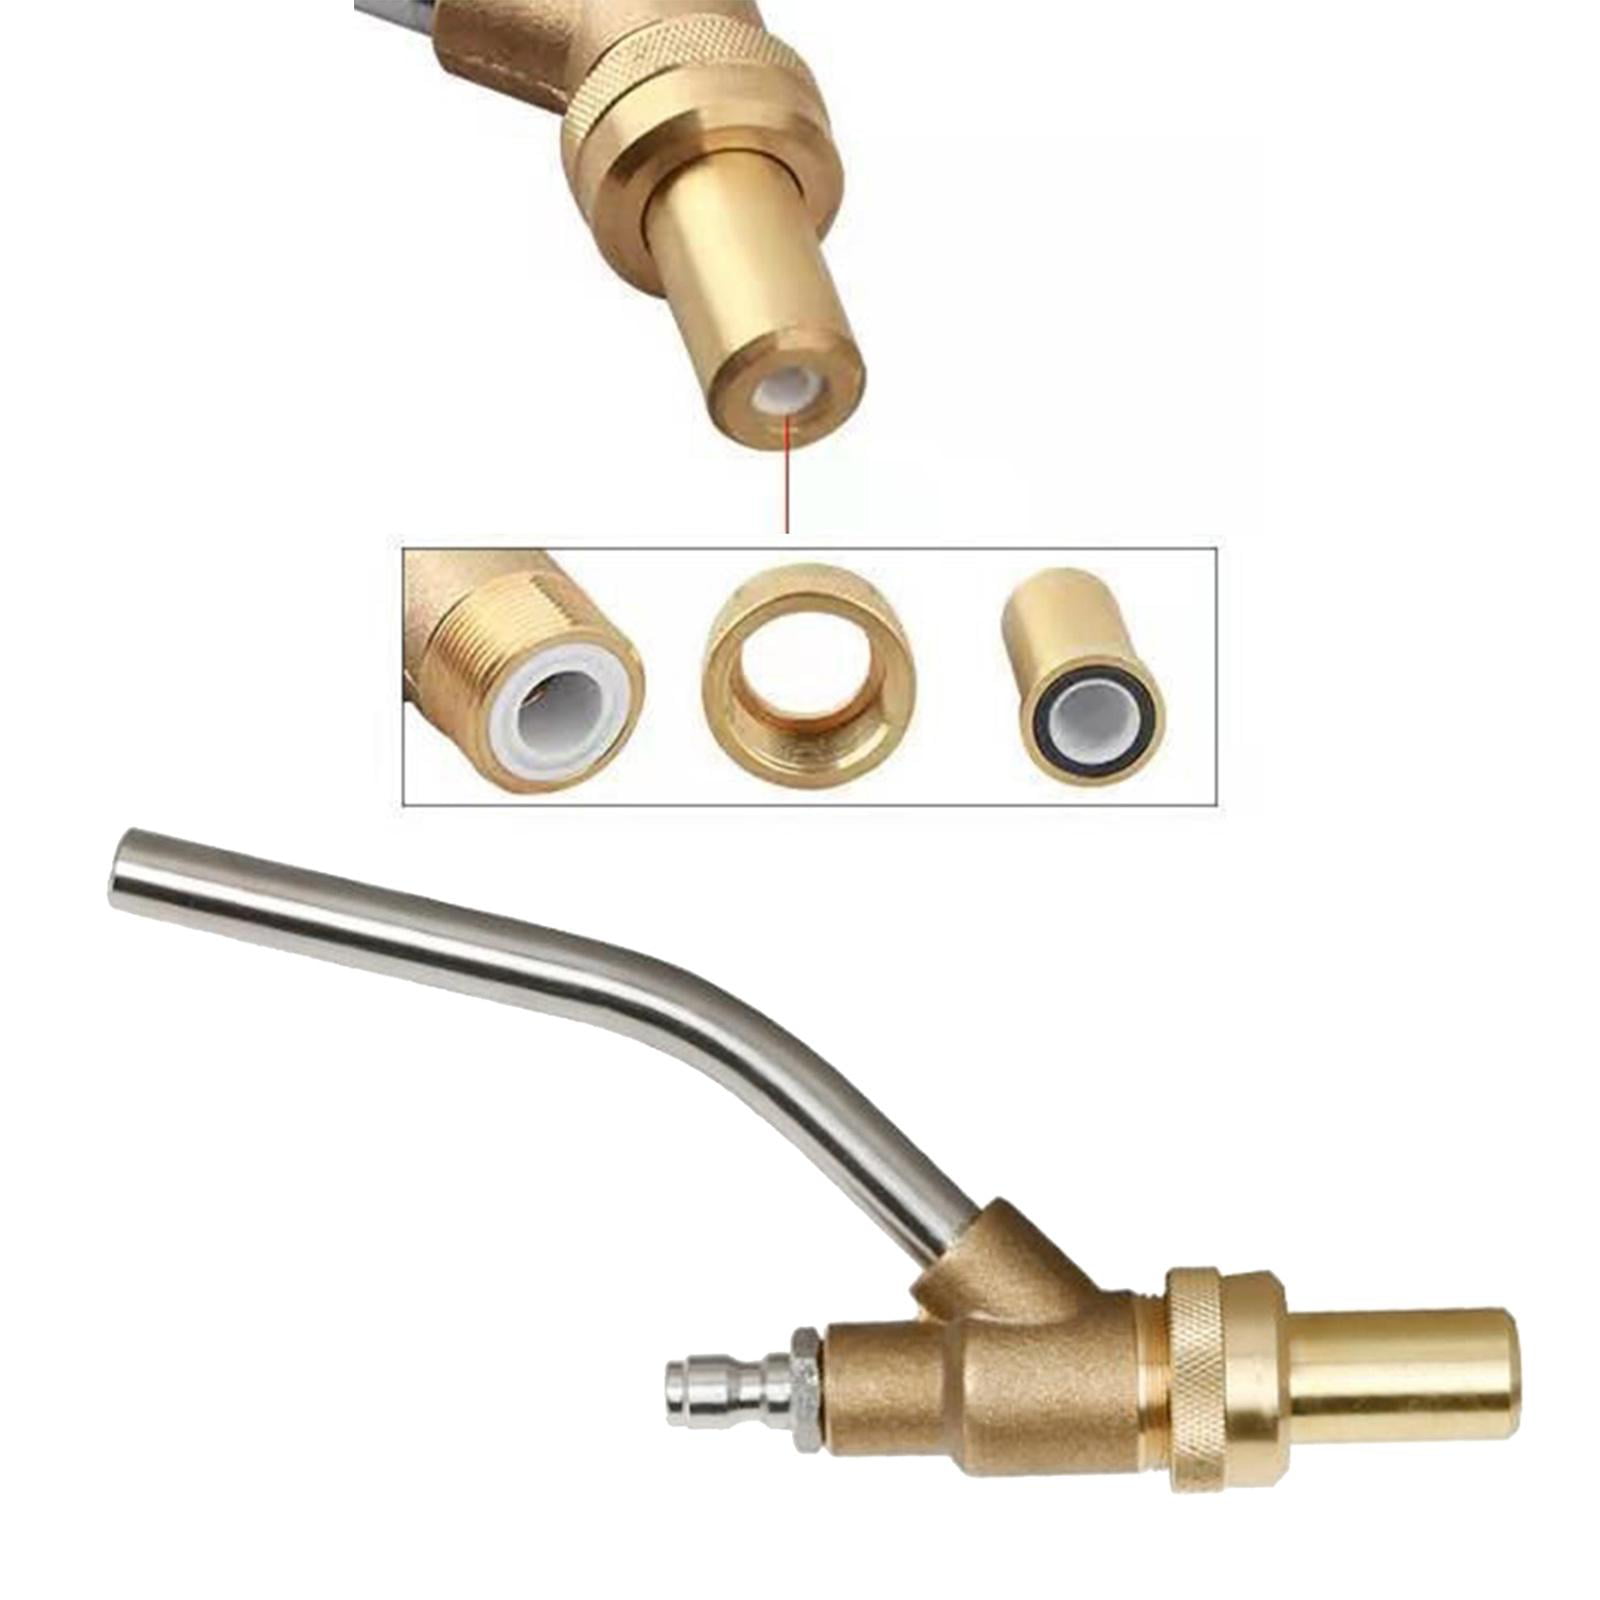 Details about   For High Pressure-Washer 1/4 Inch 21CM Sand Blasting Hose Pipe Joint Connector 